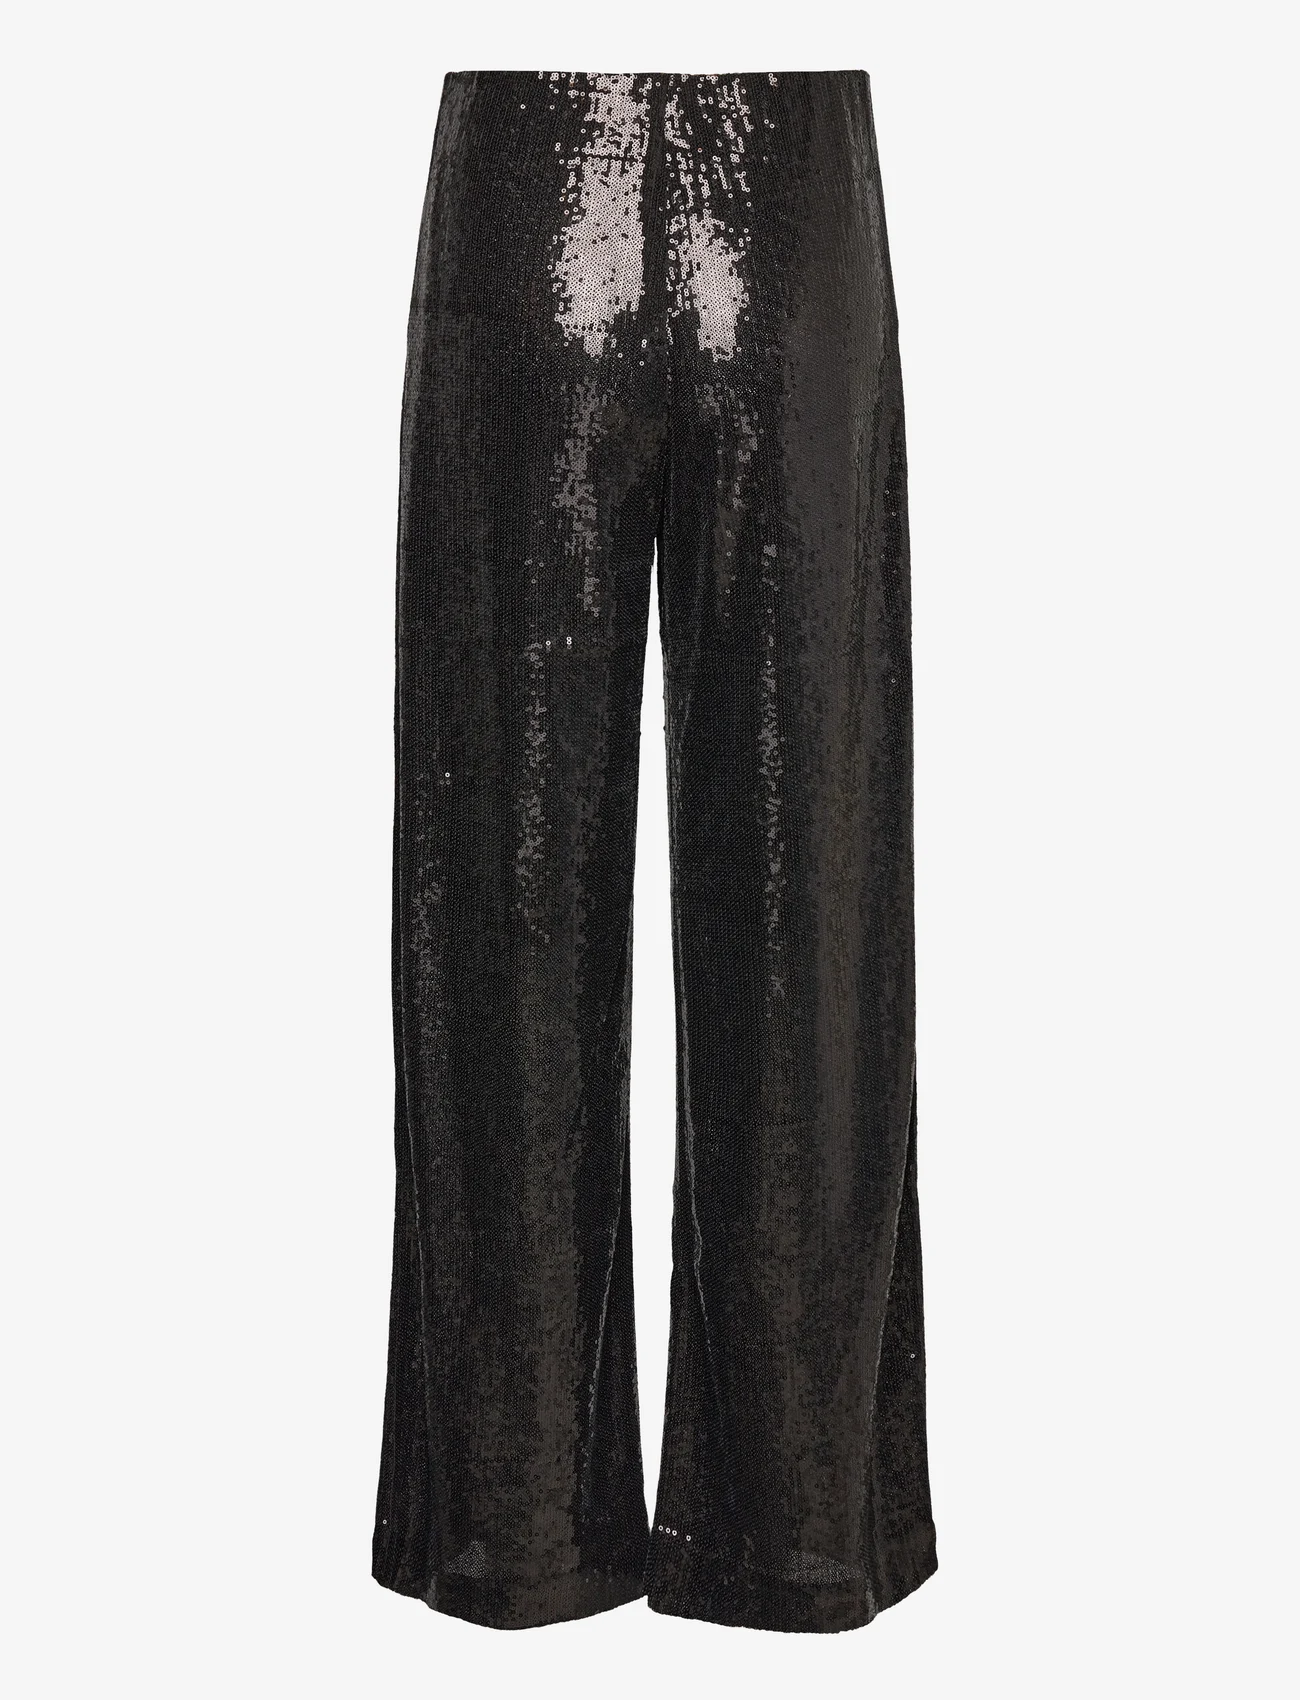 2NDDAY - 2ND Edition Soma - Animal Glam - wide leg trousers - meteorite (black) - 1